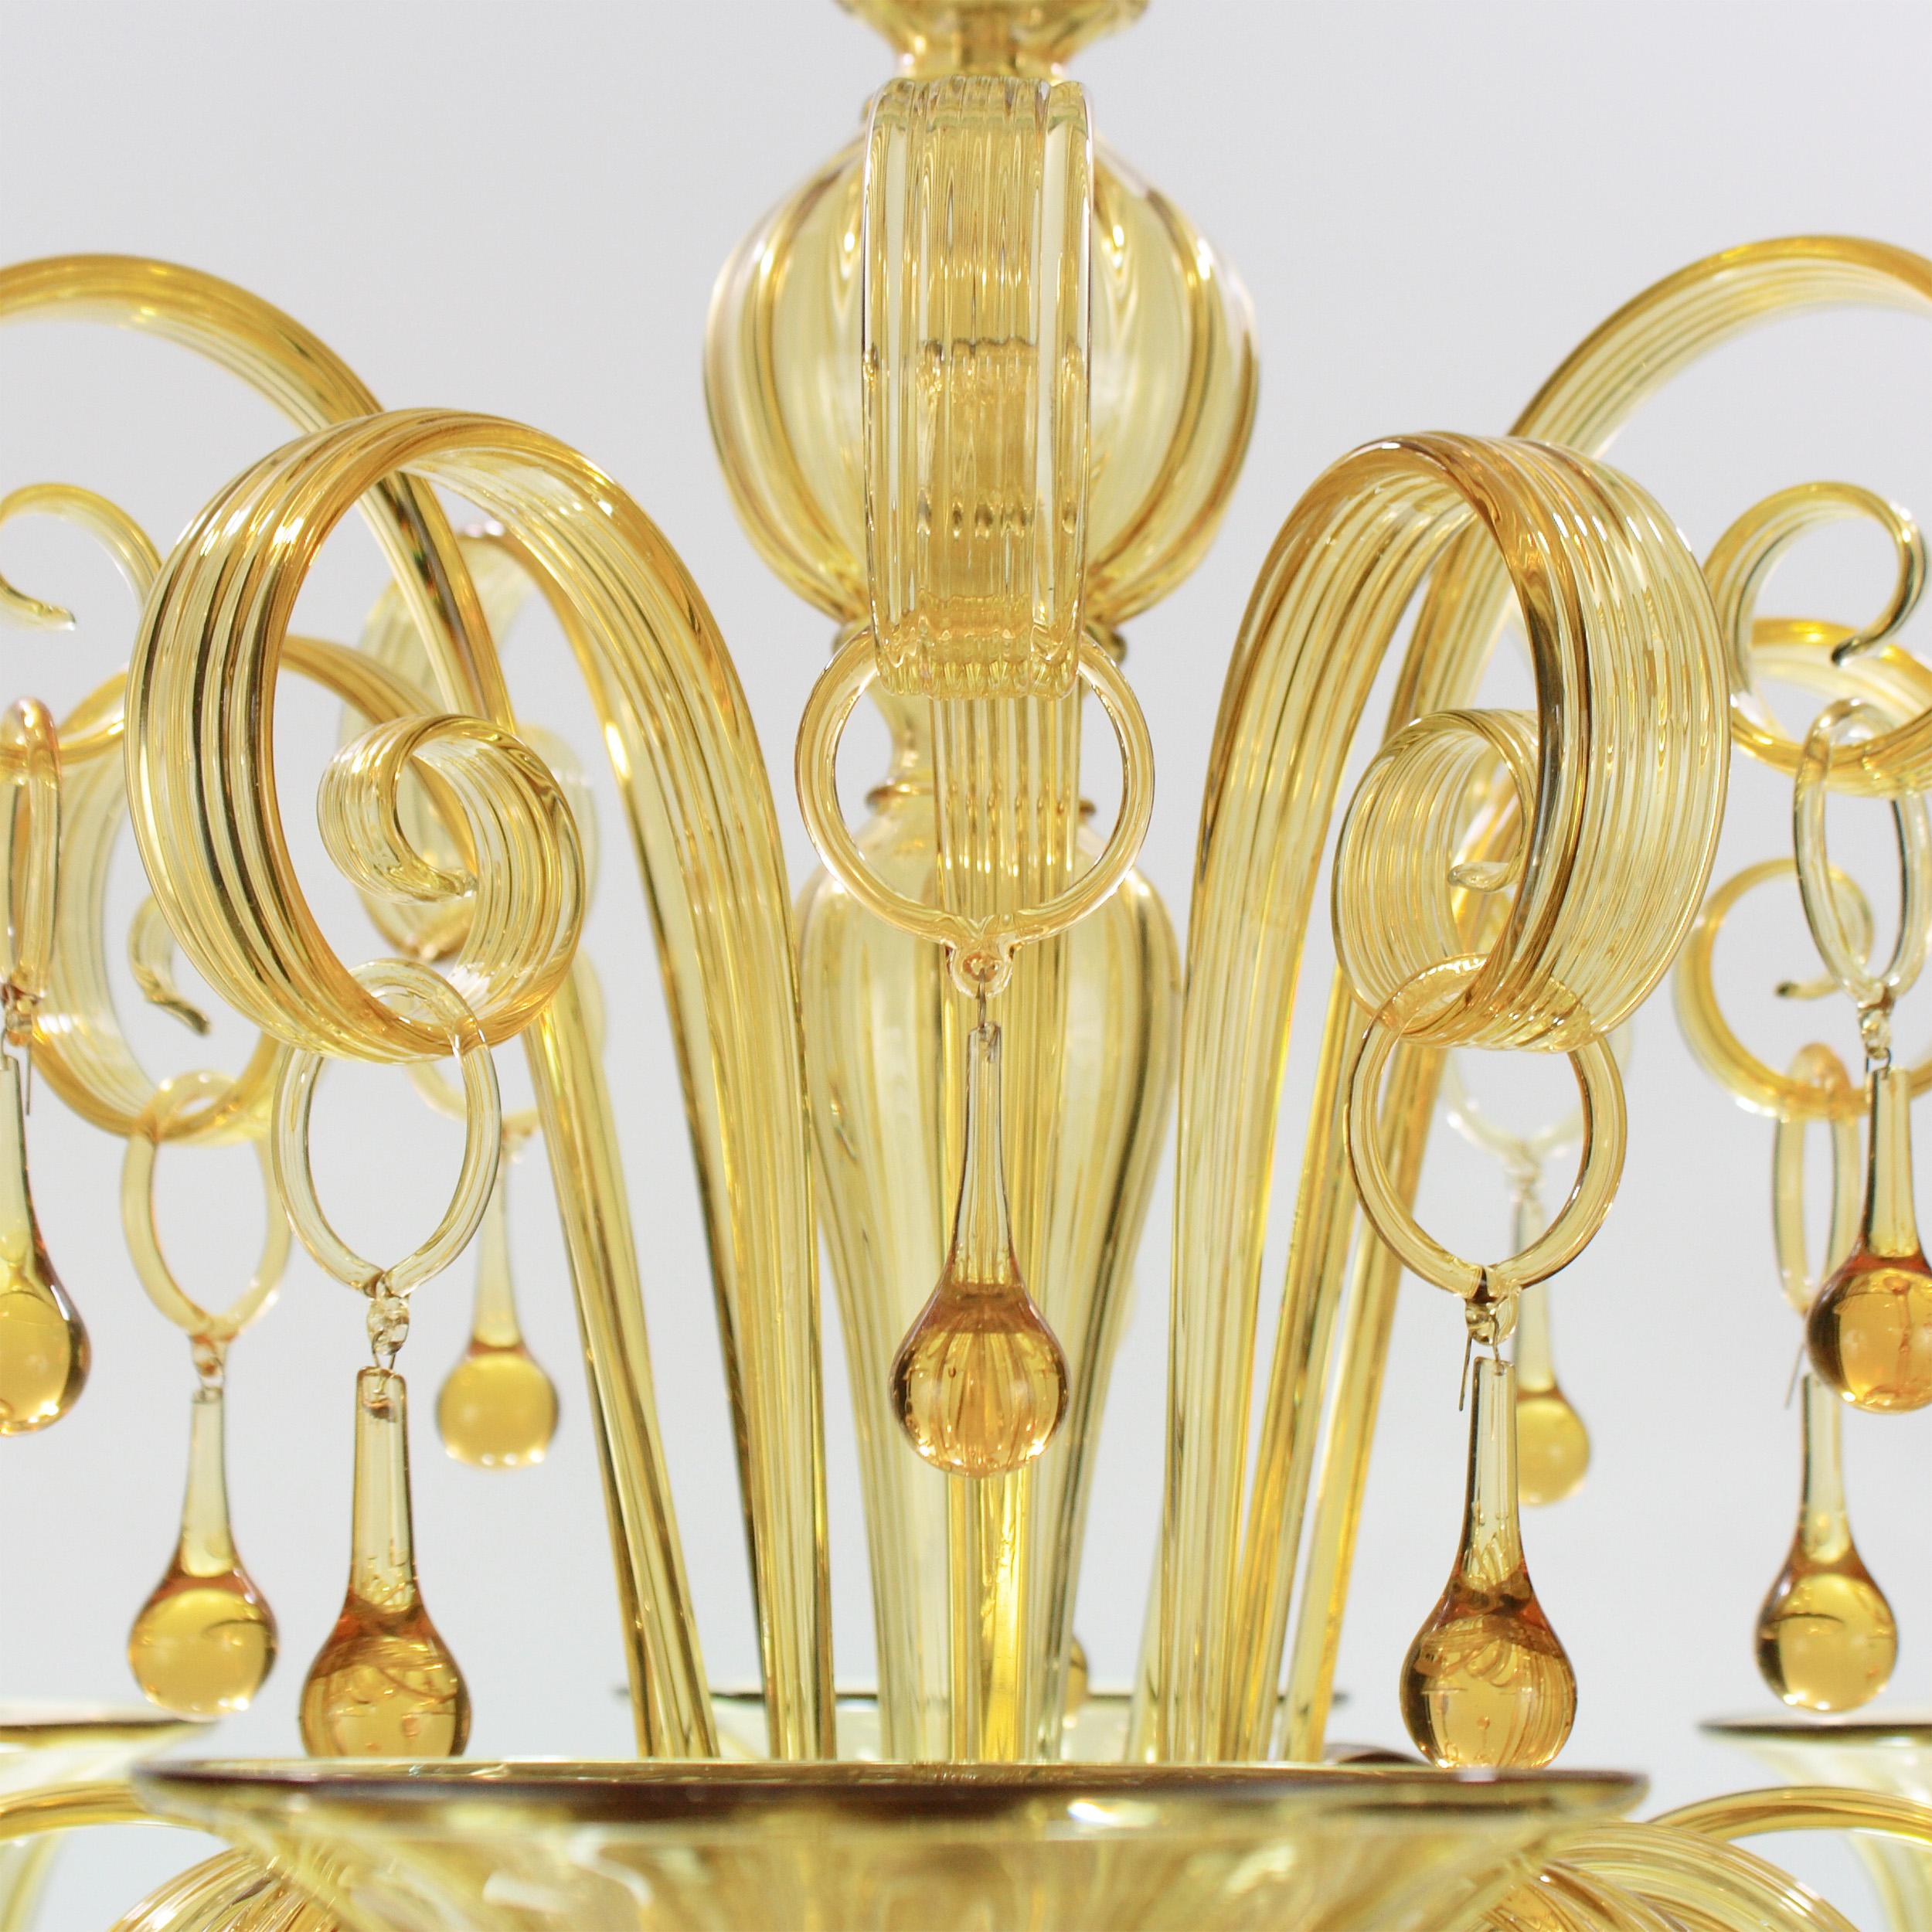 Rich chandelier by Multiforme with 6 lights, in amber artistic glass, with curly ornamental elements.
Inspired by the Classic Venetian tradition it is characterized by a central column where many blown glass “pastoral” elements are installed. These